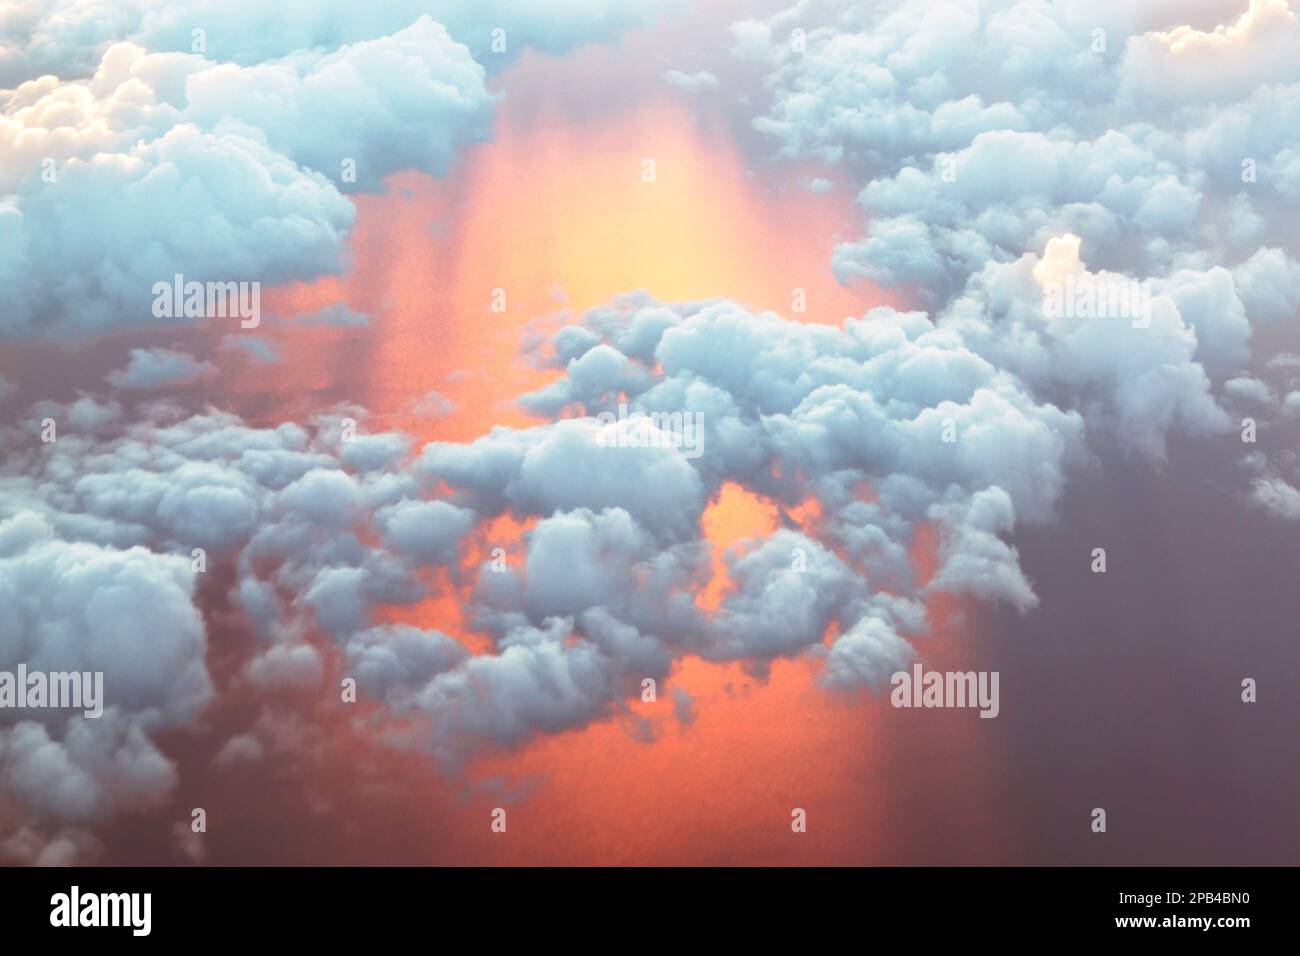 Aerial view, abstract sky background with sunset colored sea and clouds Stock Photo